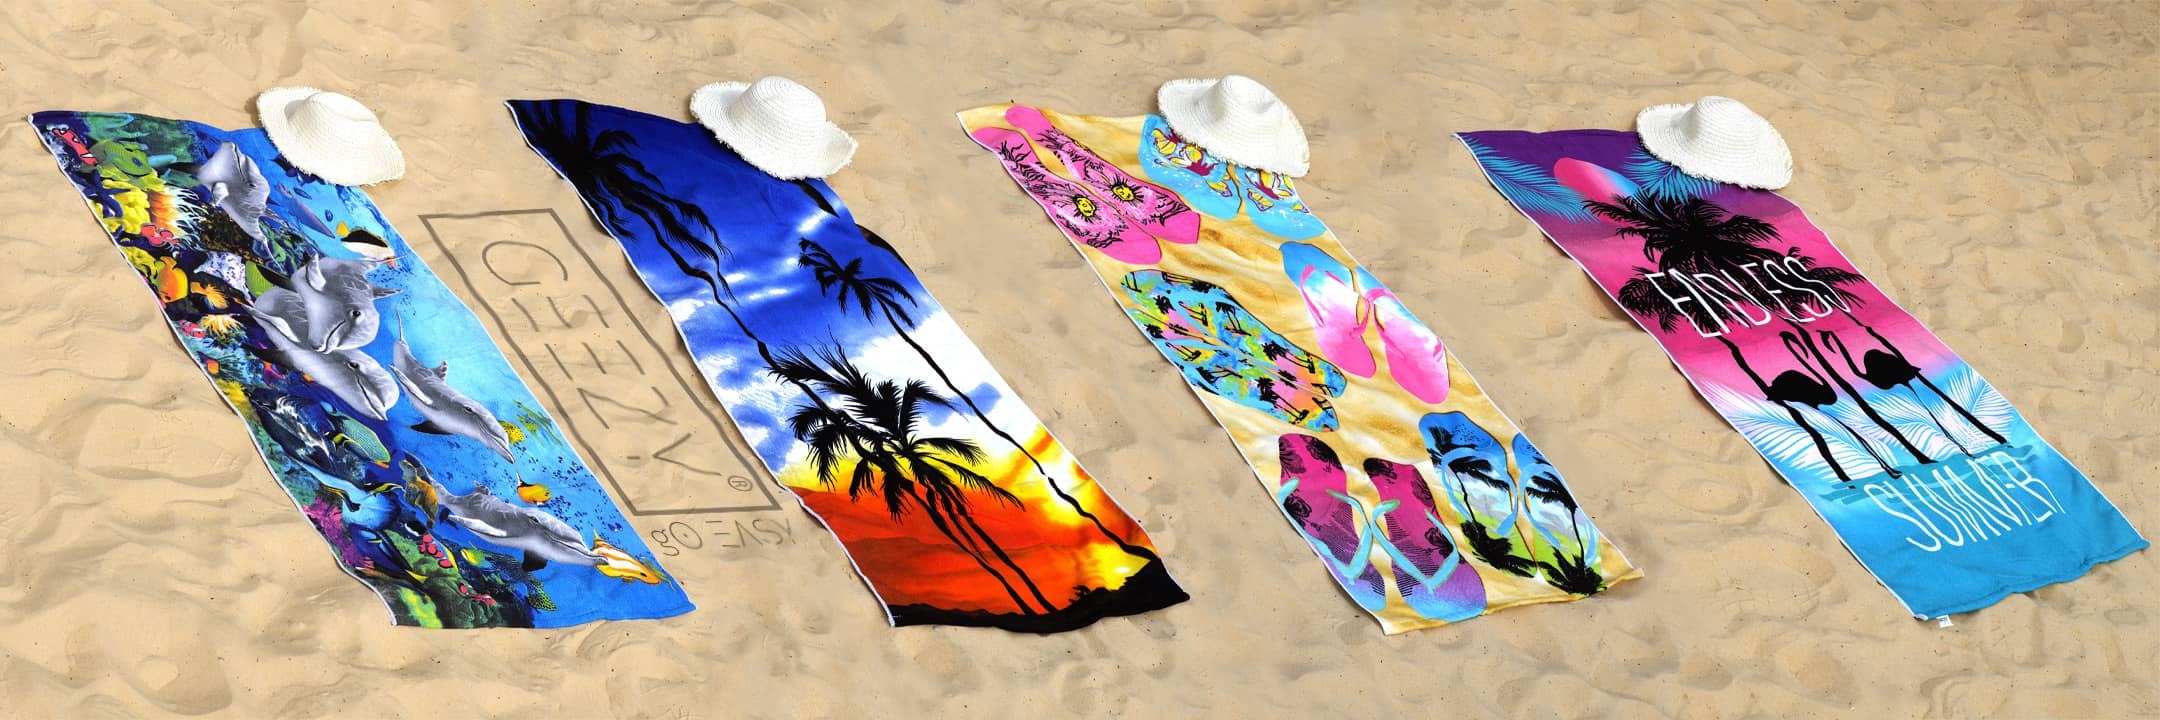 Beach Towel Category - The Magic Toy Shop